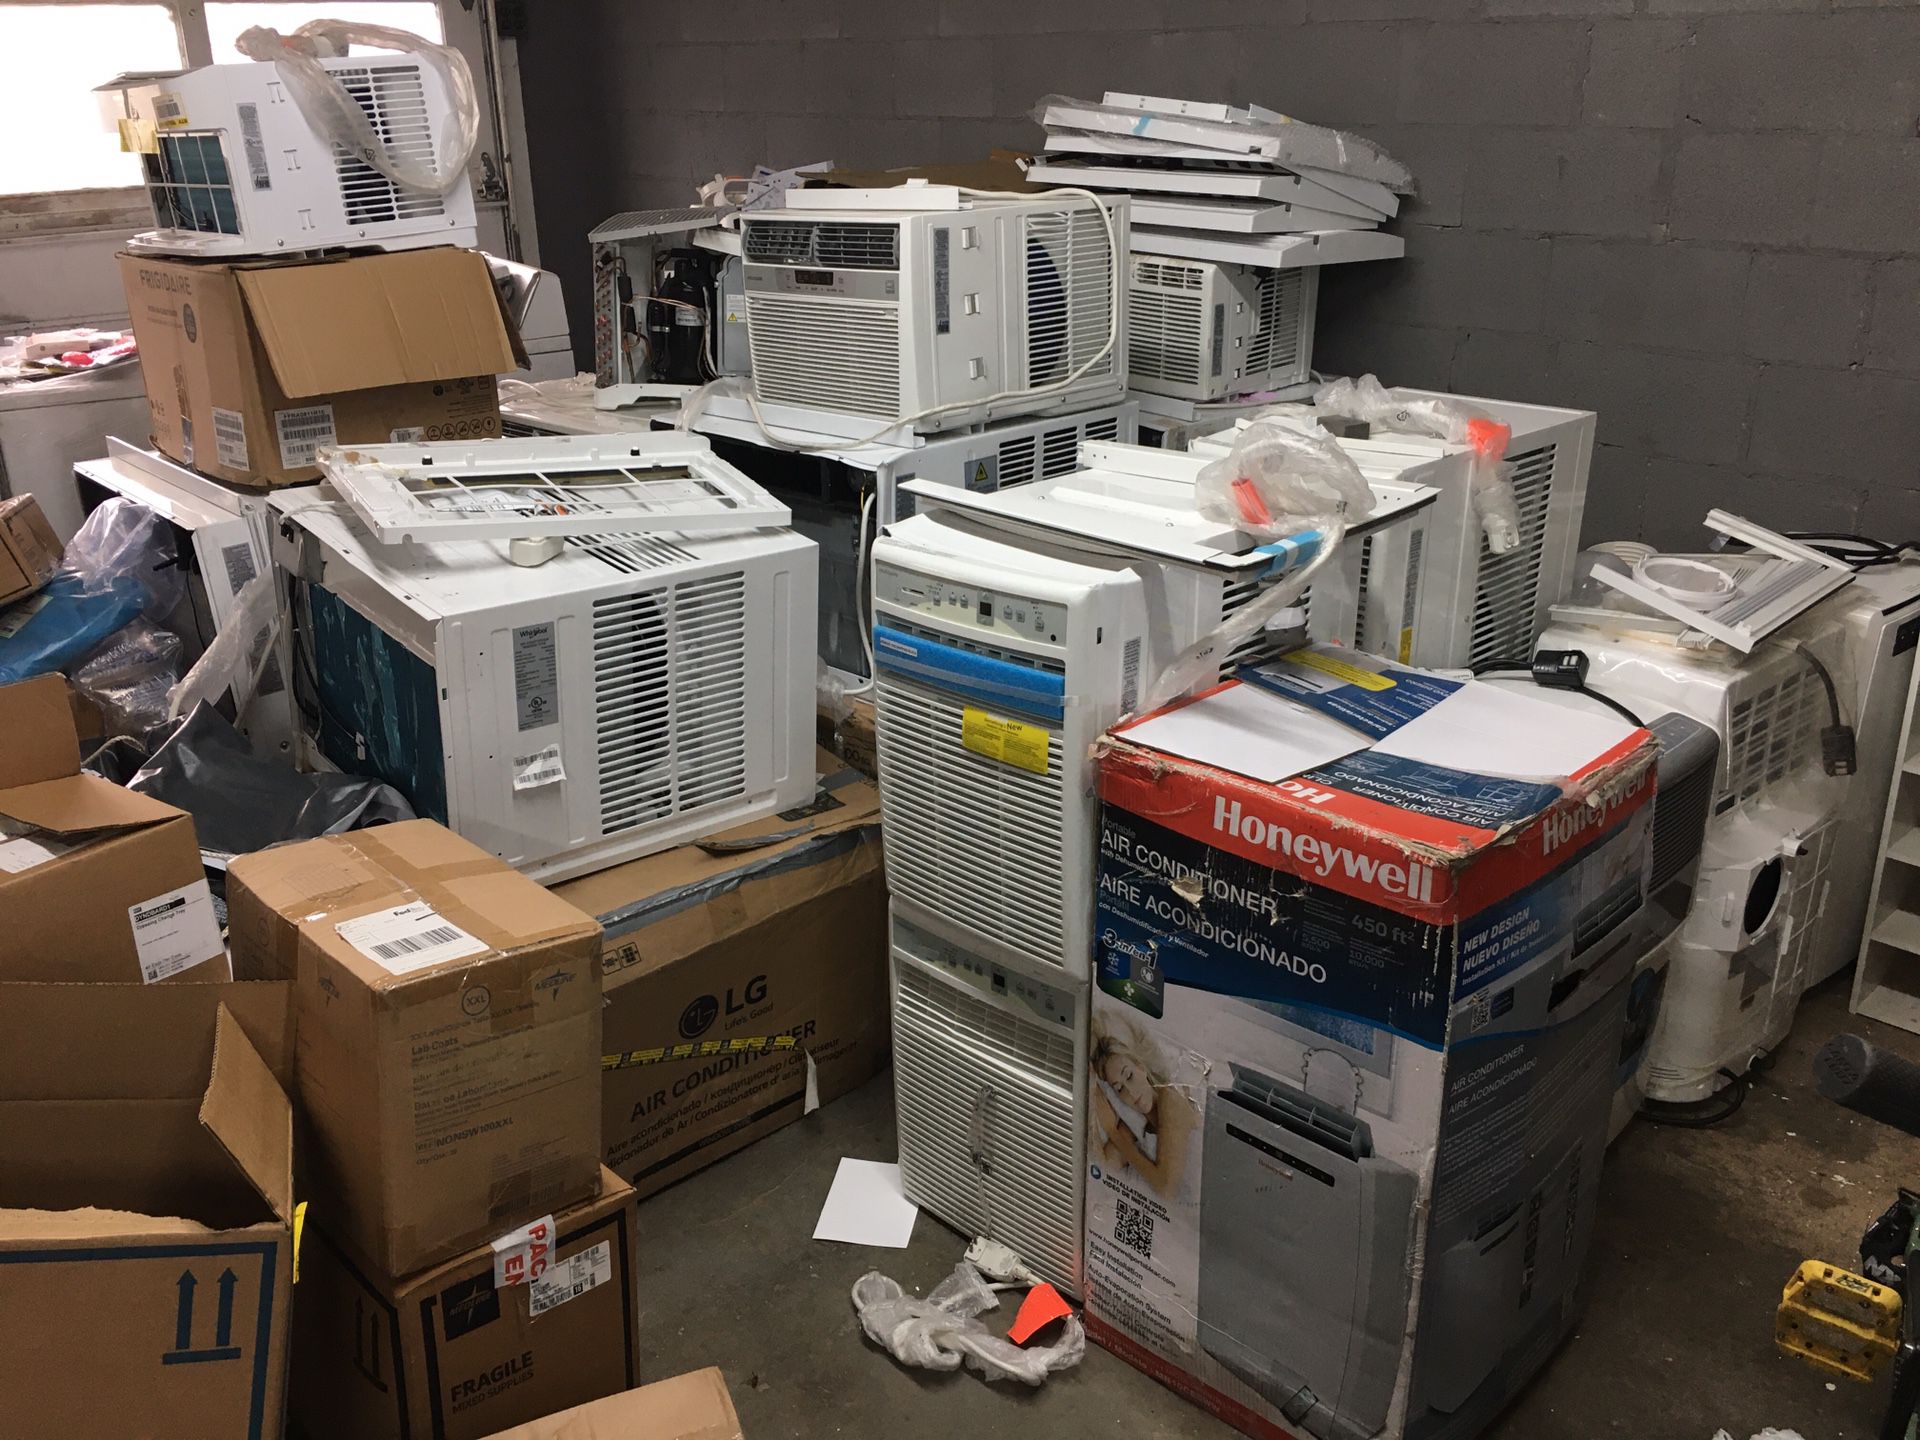 Free AC units (Air Conditioning A/C)